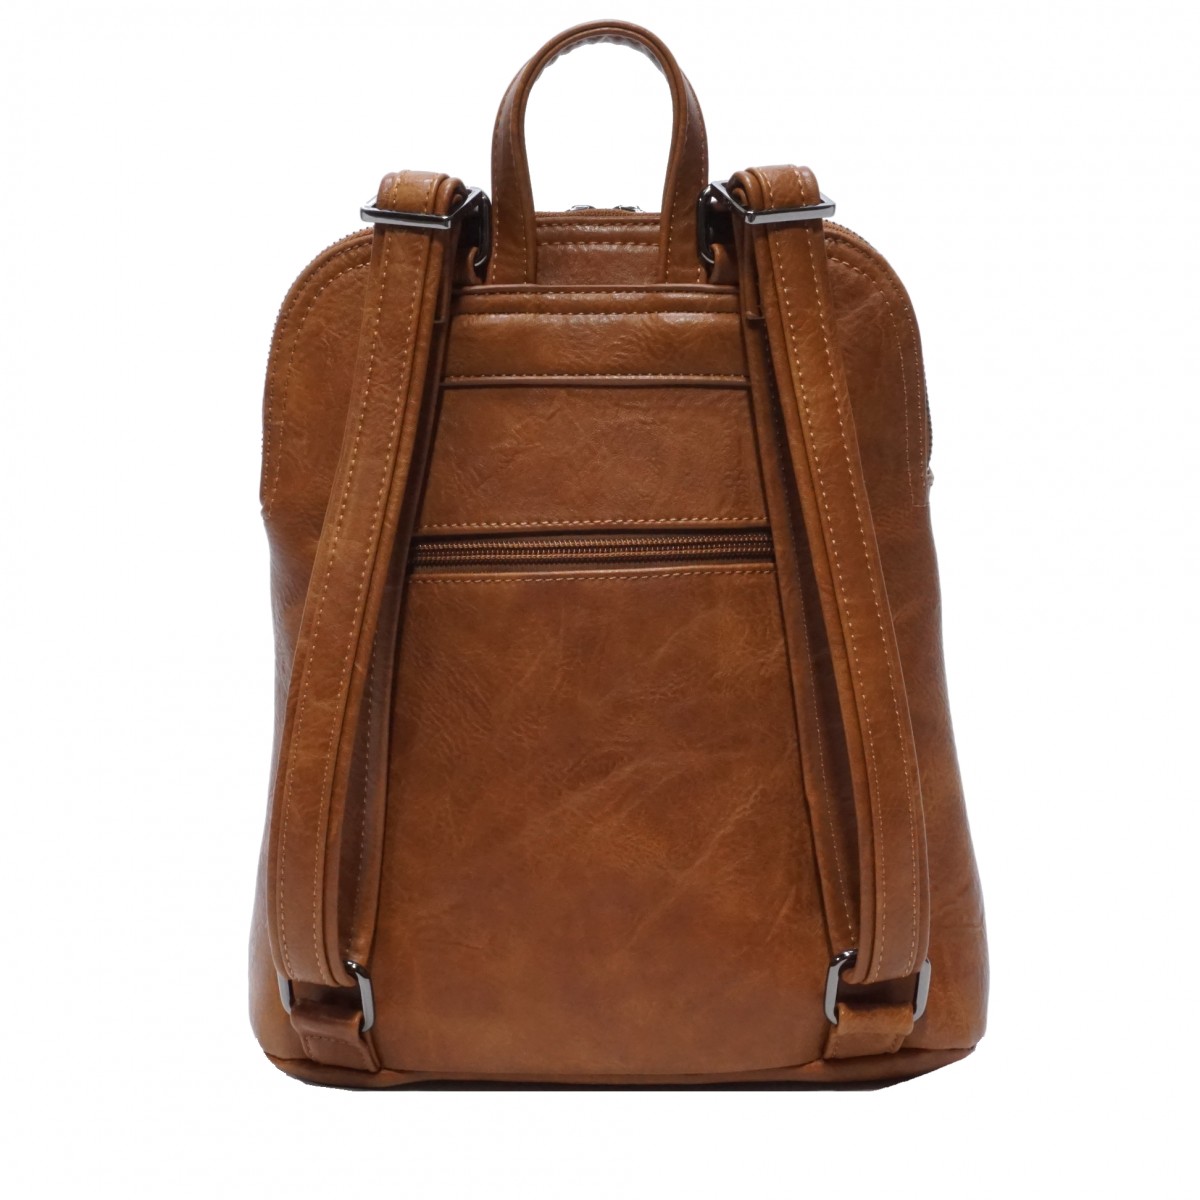 Maggie Convertible Backpack - Camel 